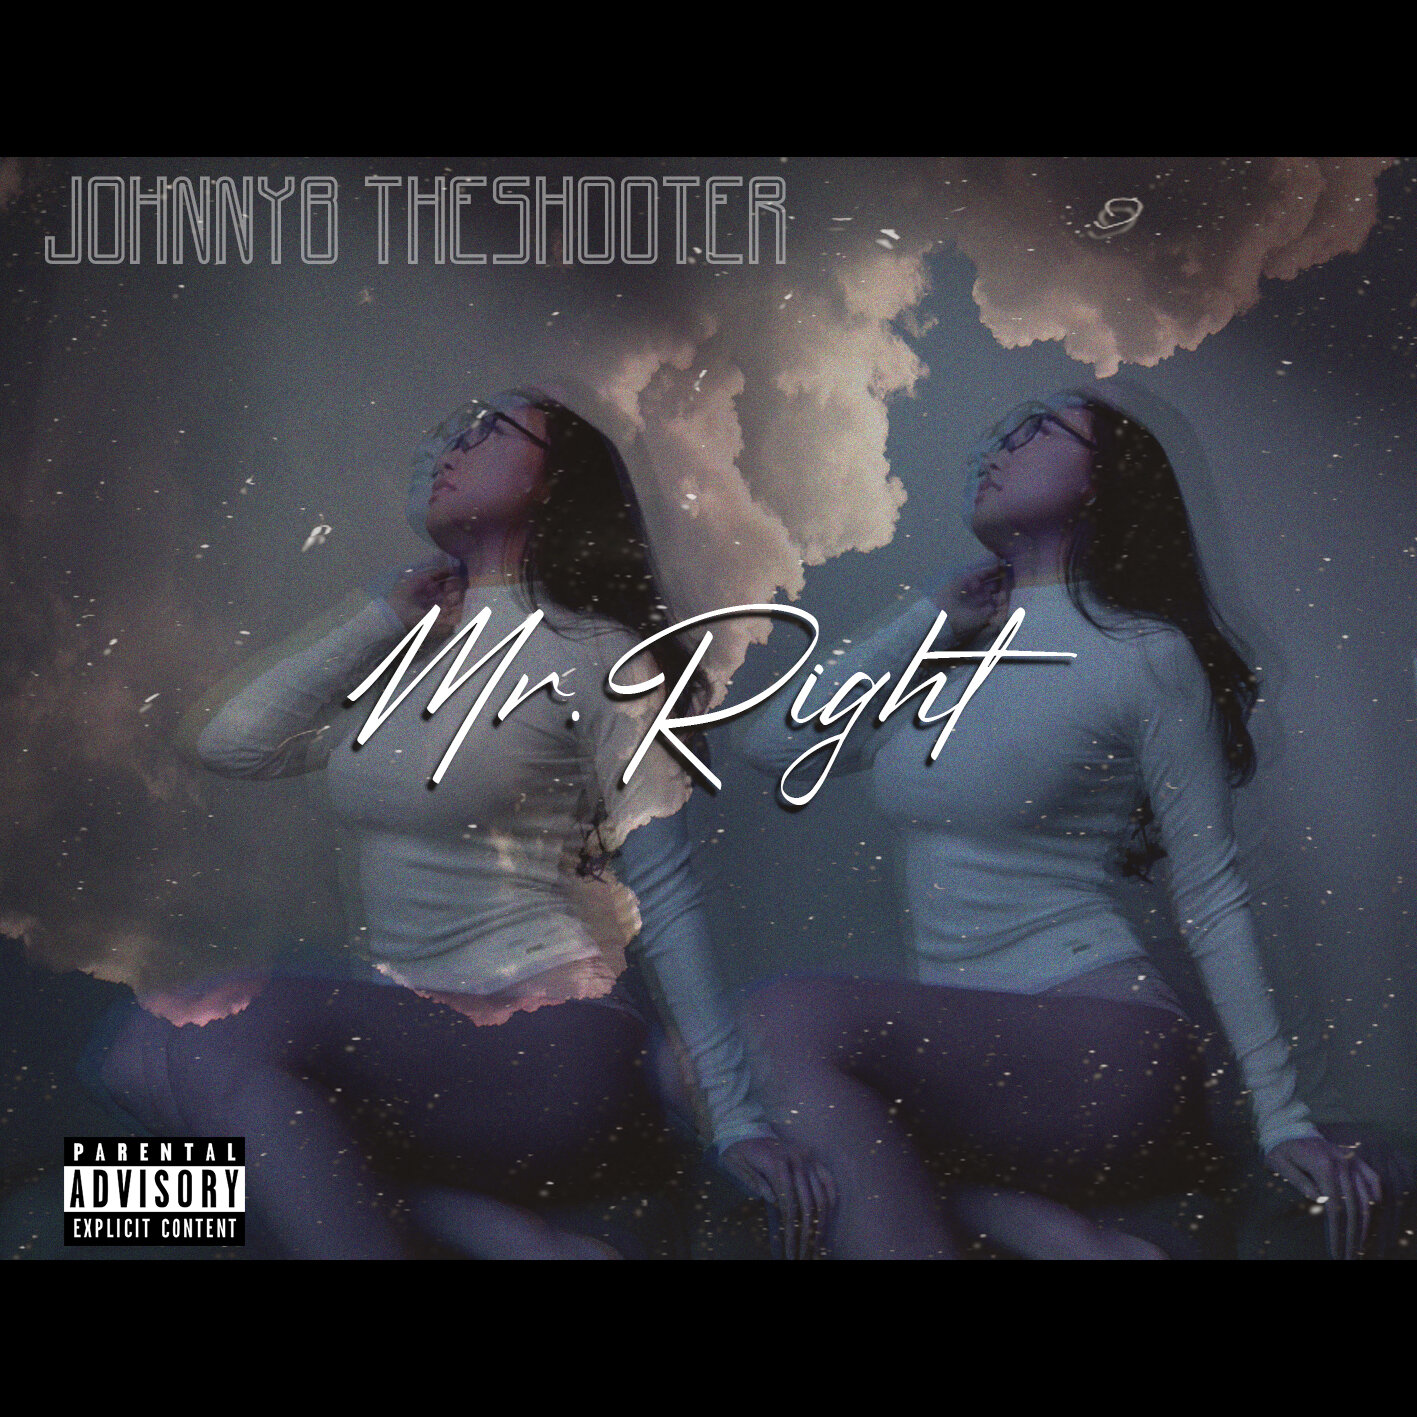 Mr. Right - JohnnyB theShooter COVER.jpg